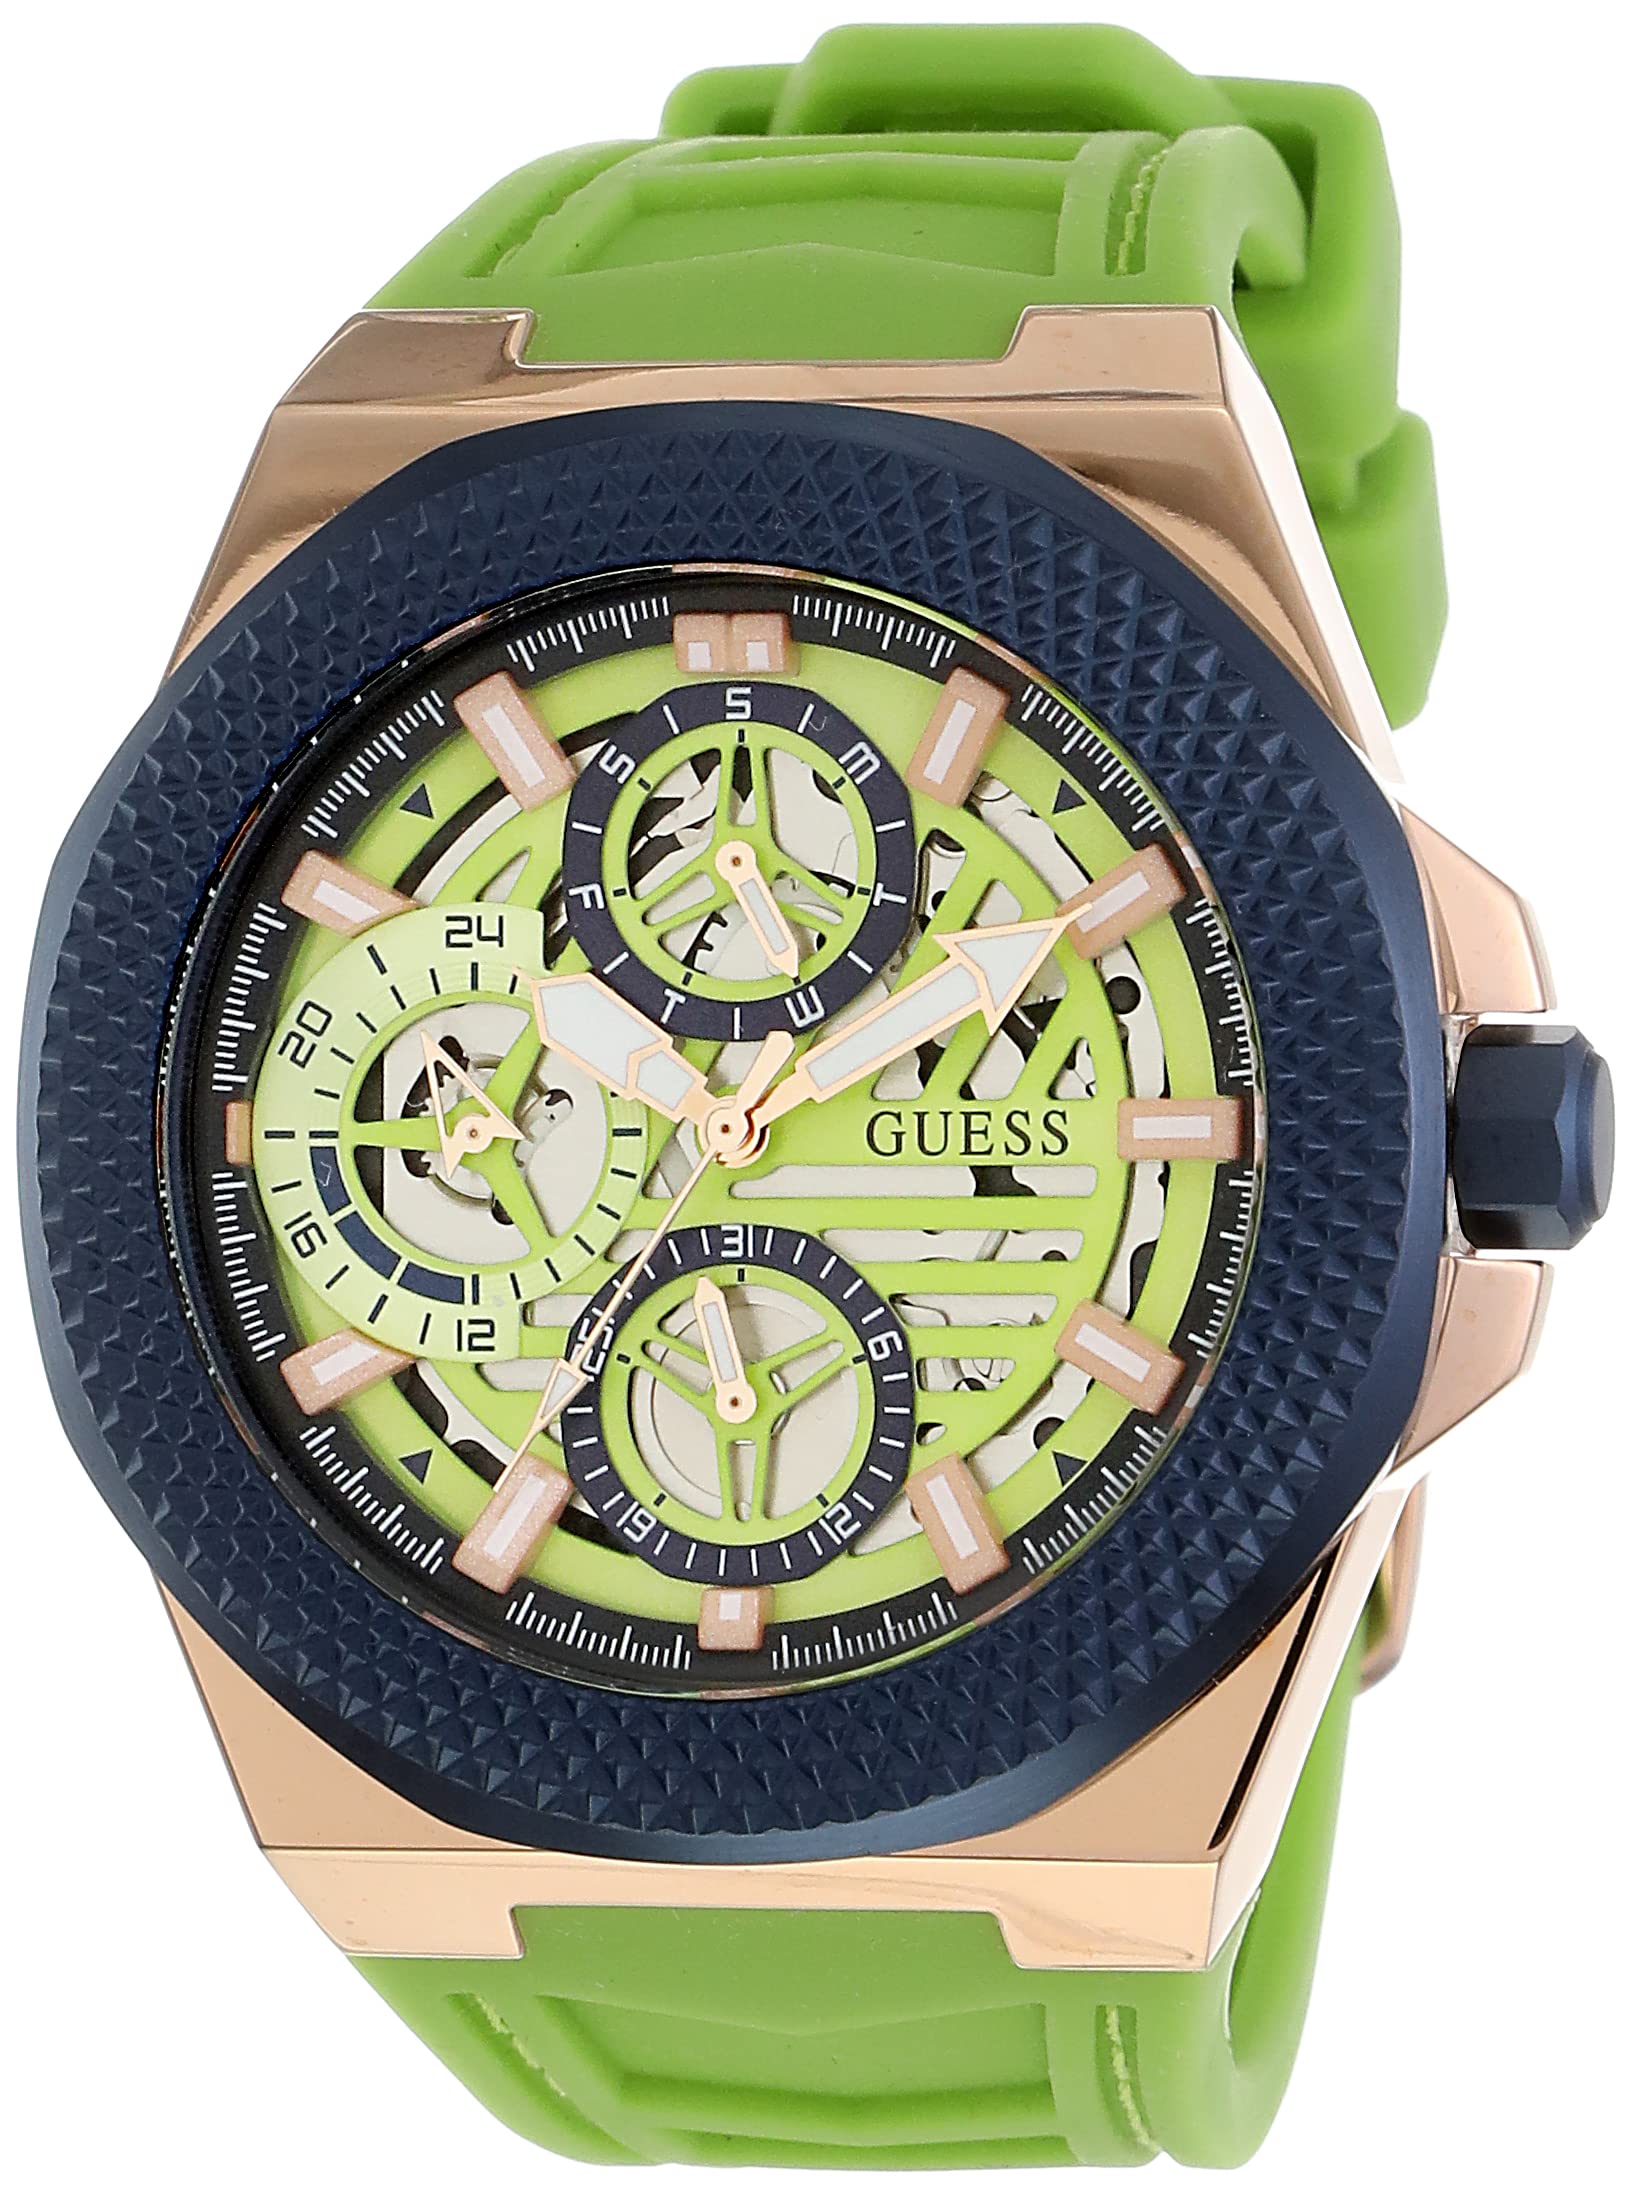 GUESS Men's 44mm Watch - Lime Green Strap Blue Dial Two-Tone Case